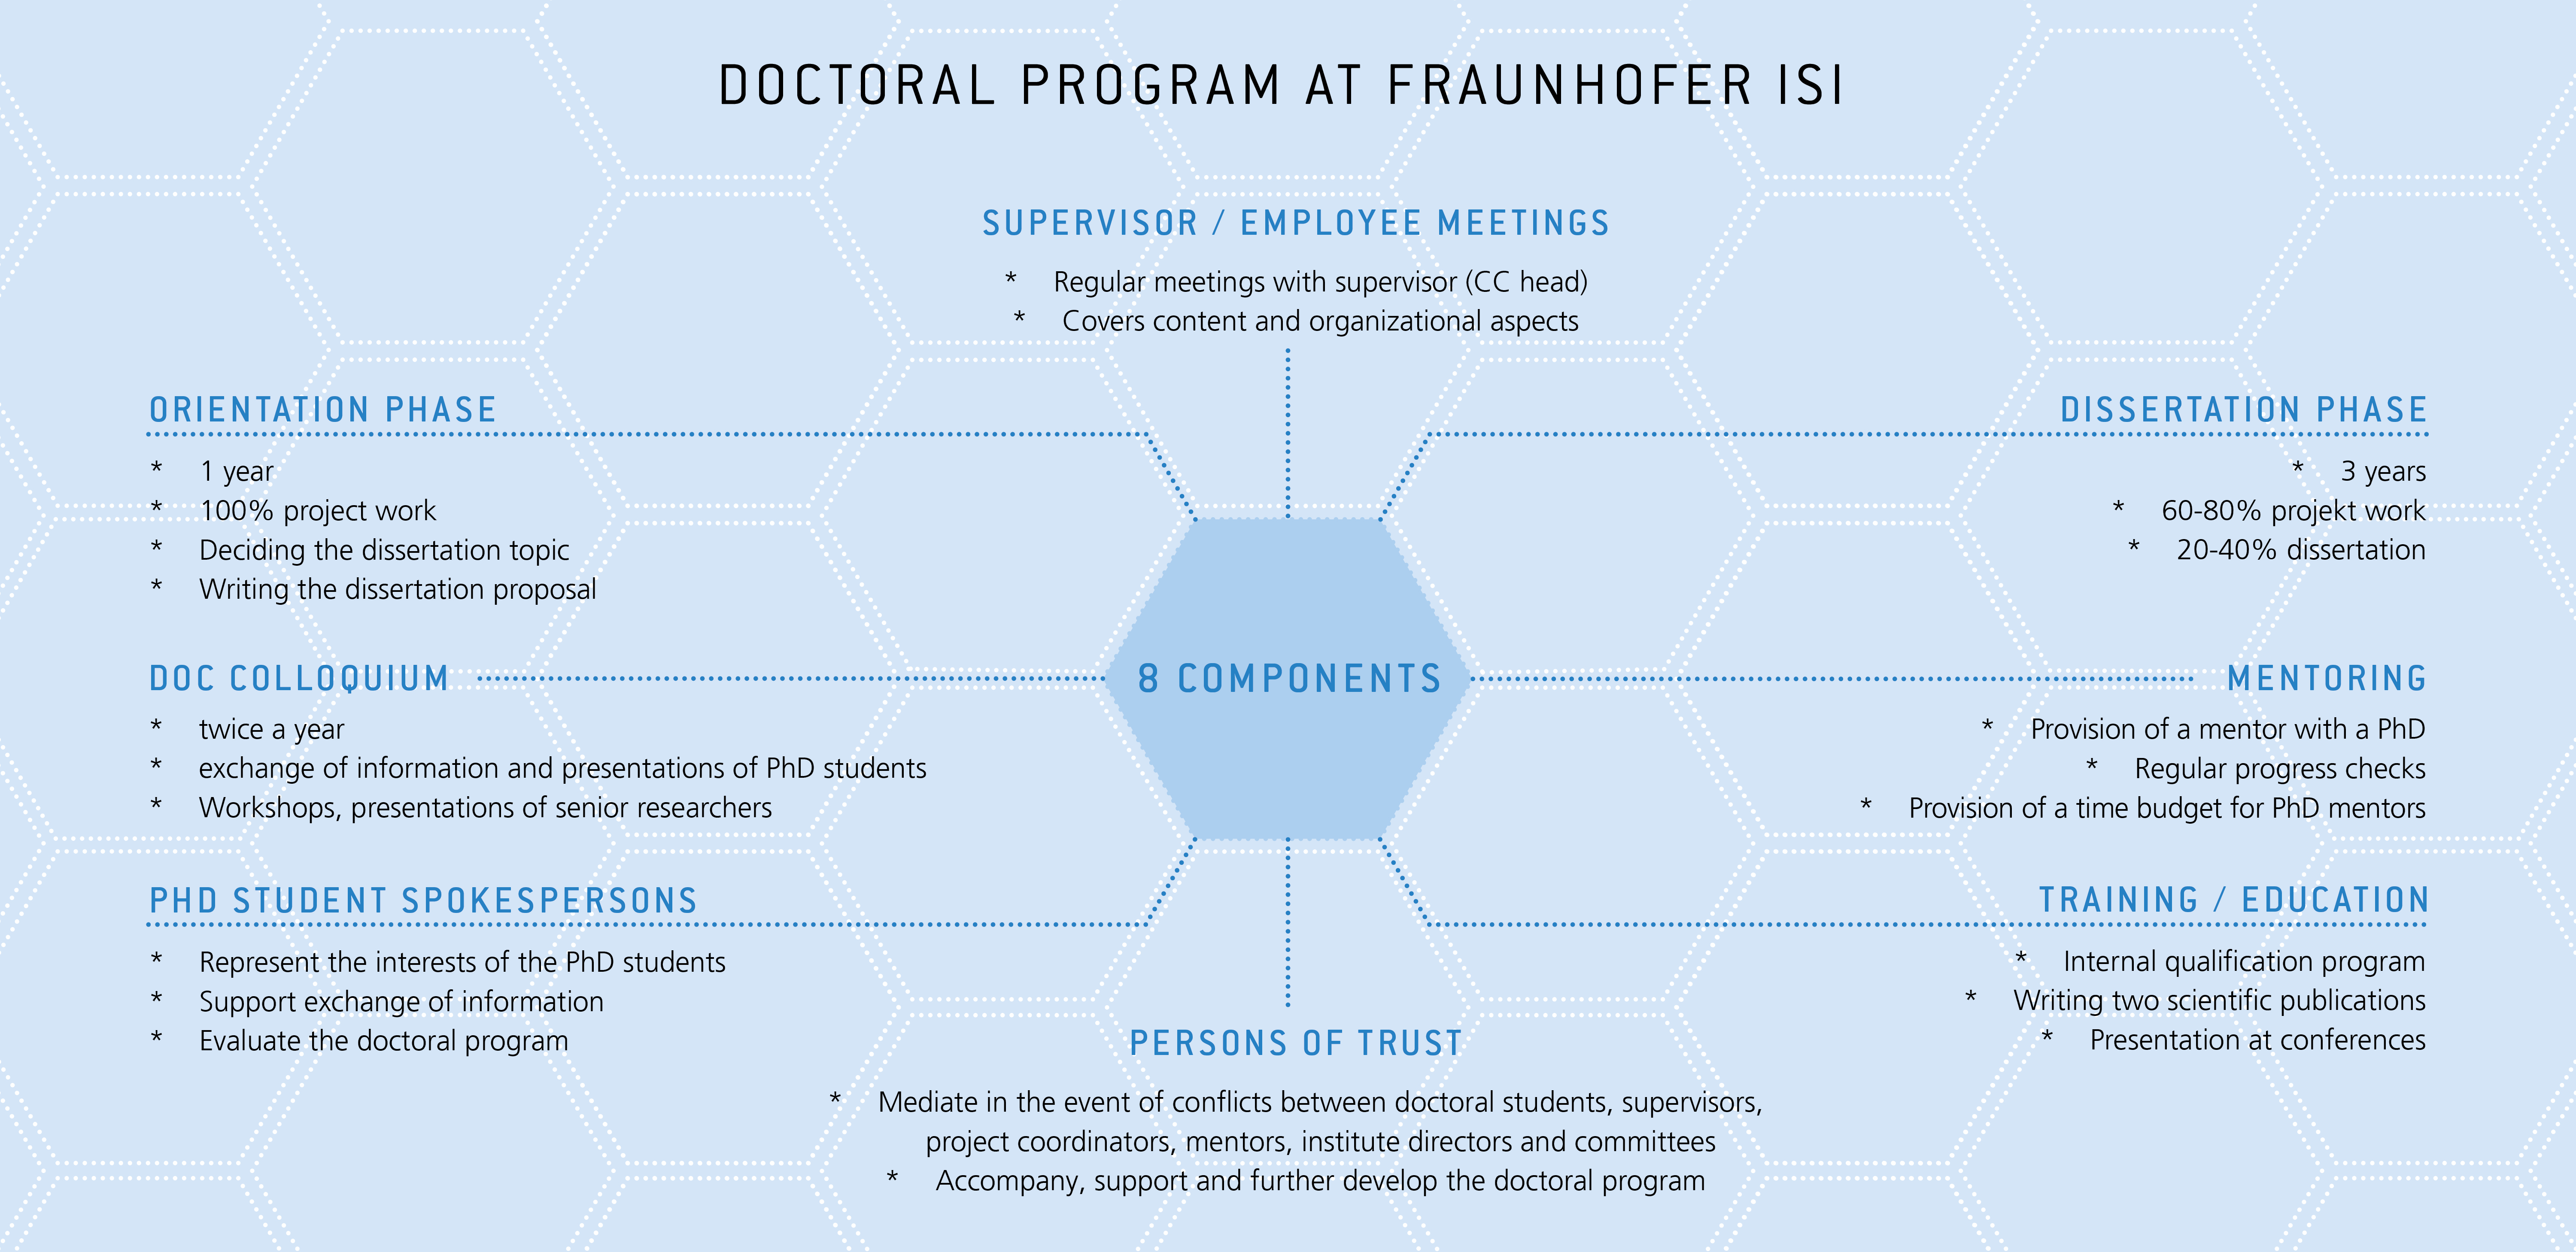 Components of the Doctoral Program at Fraunhofer ISI